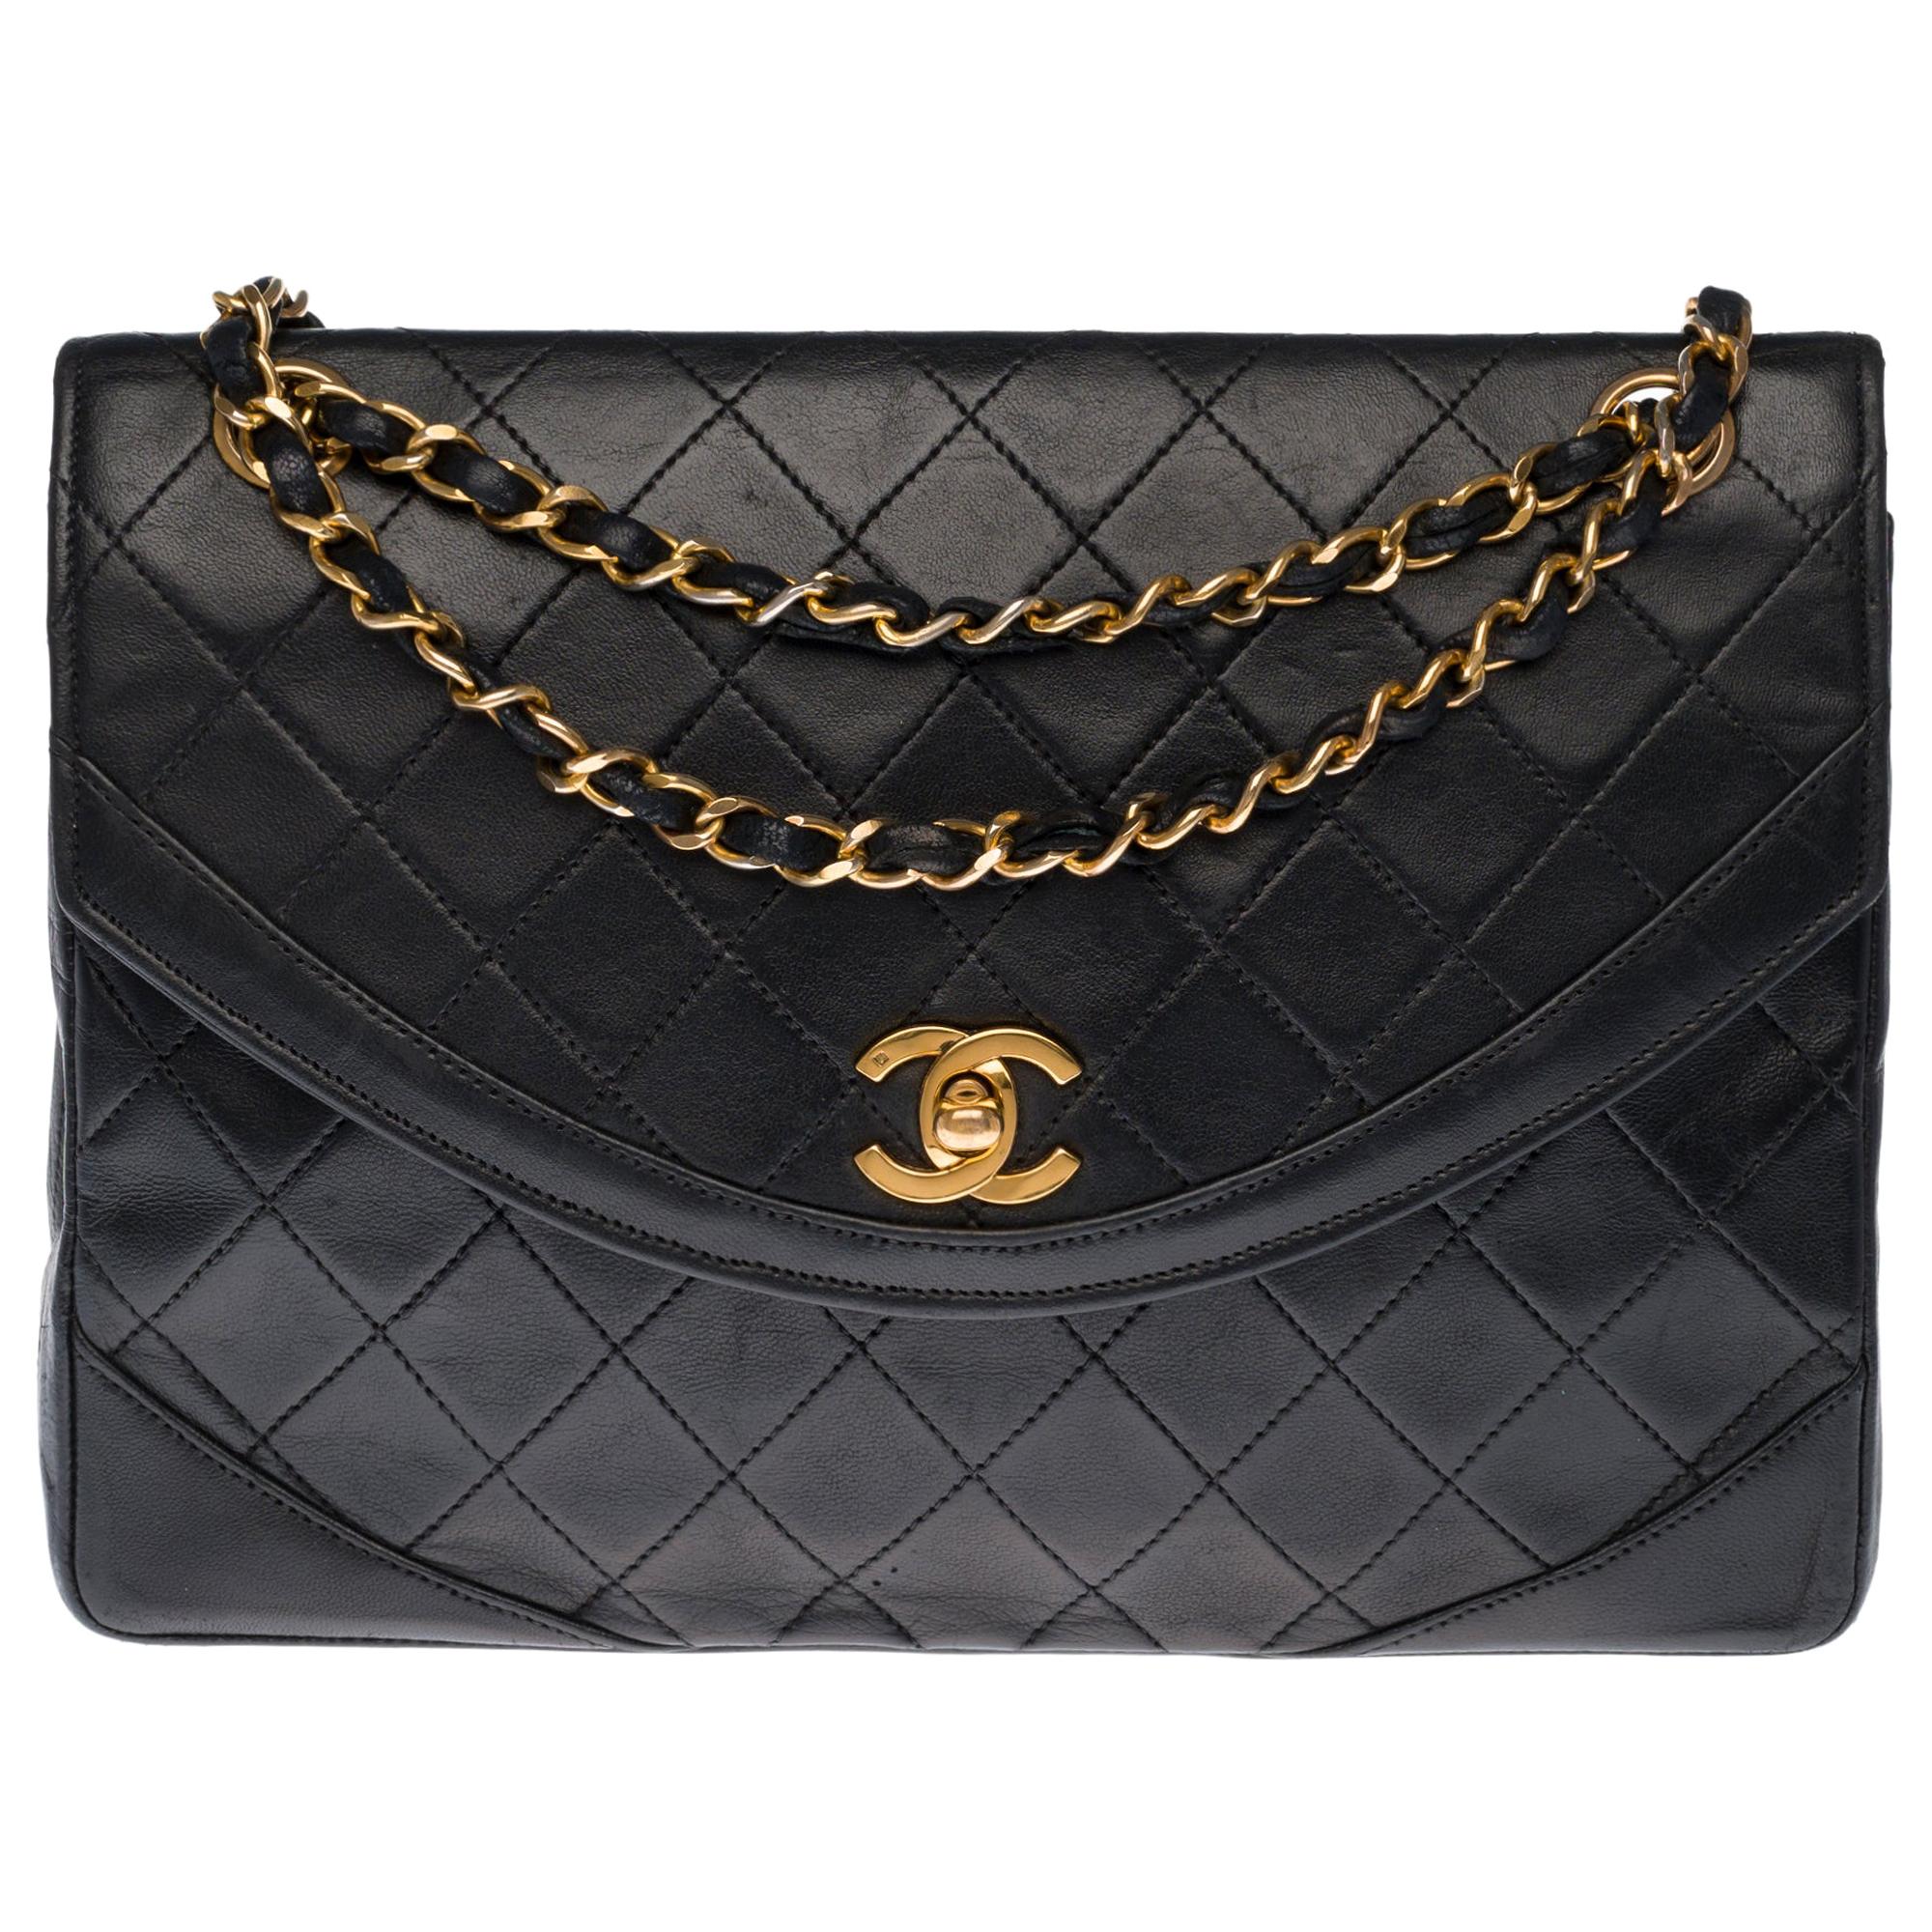 Chanel Classic Shoulder bag in black quilted leather and gold hardware